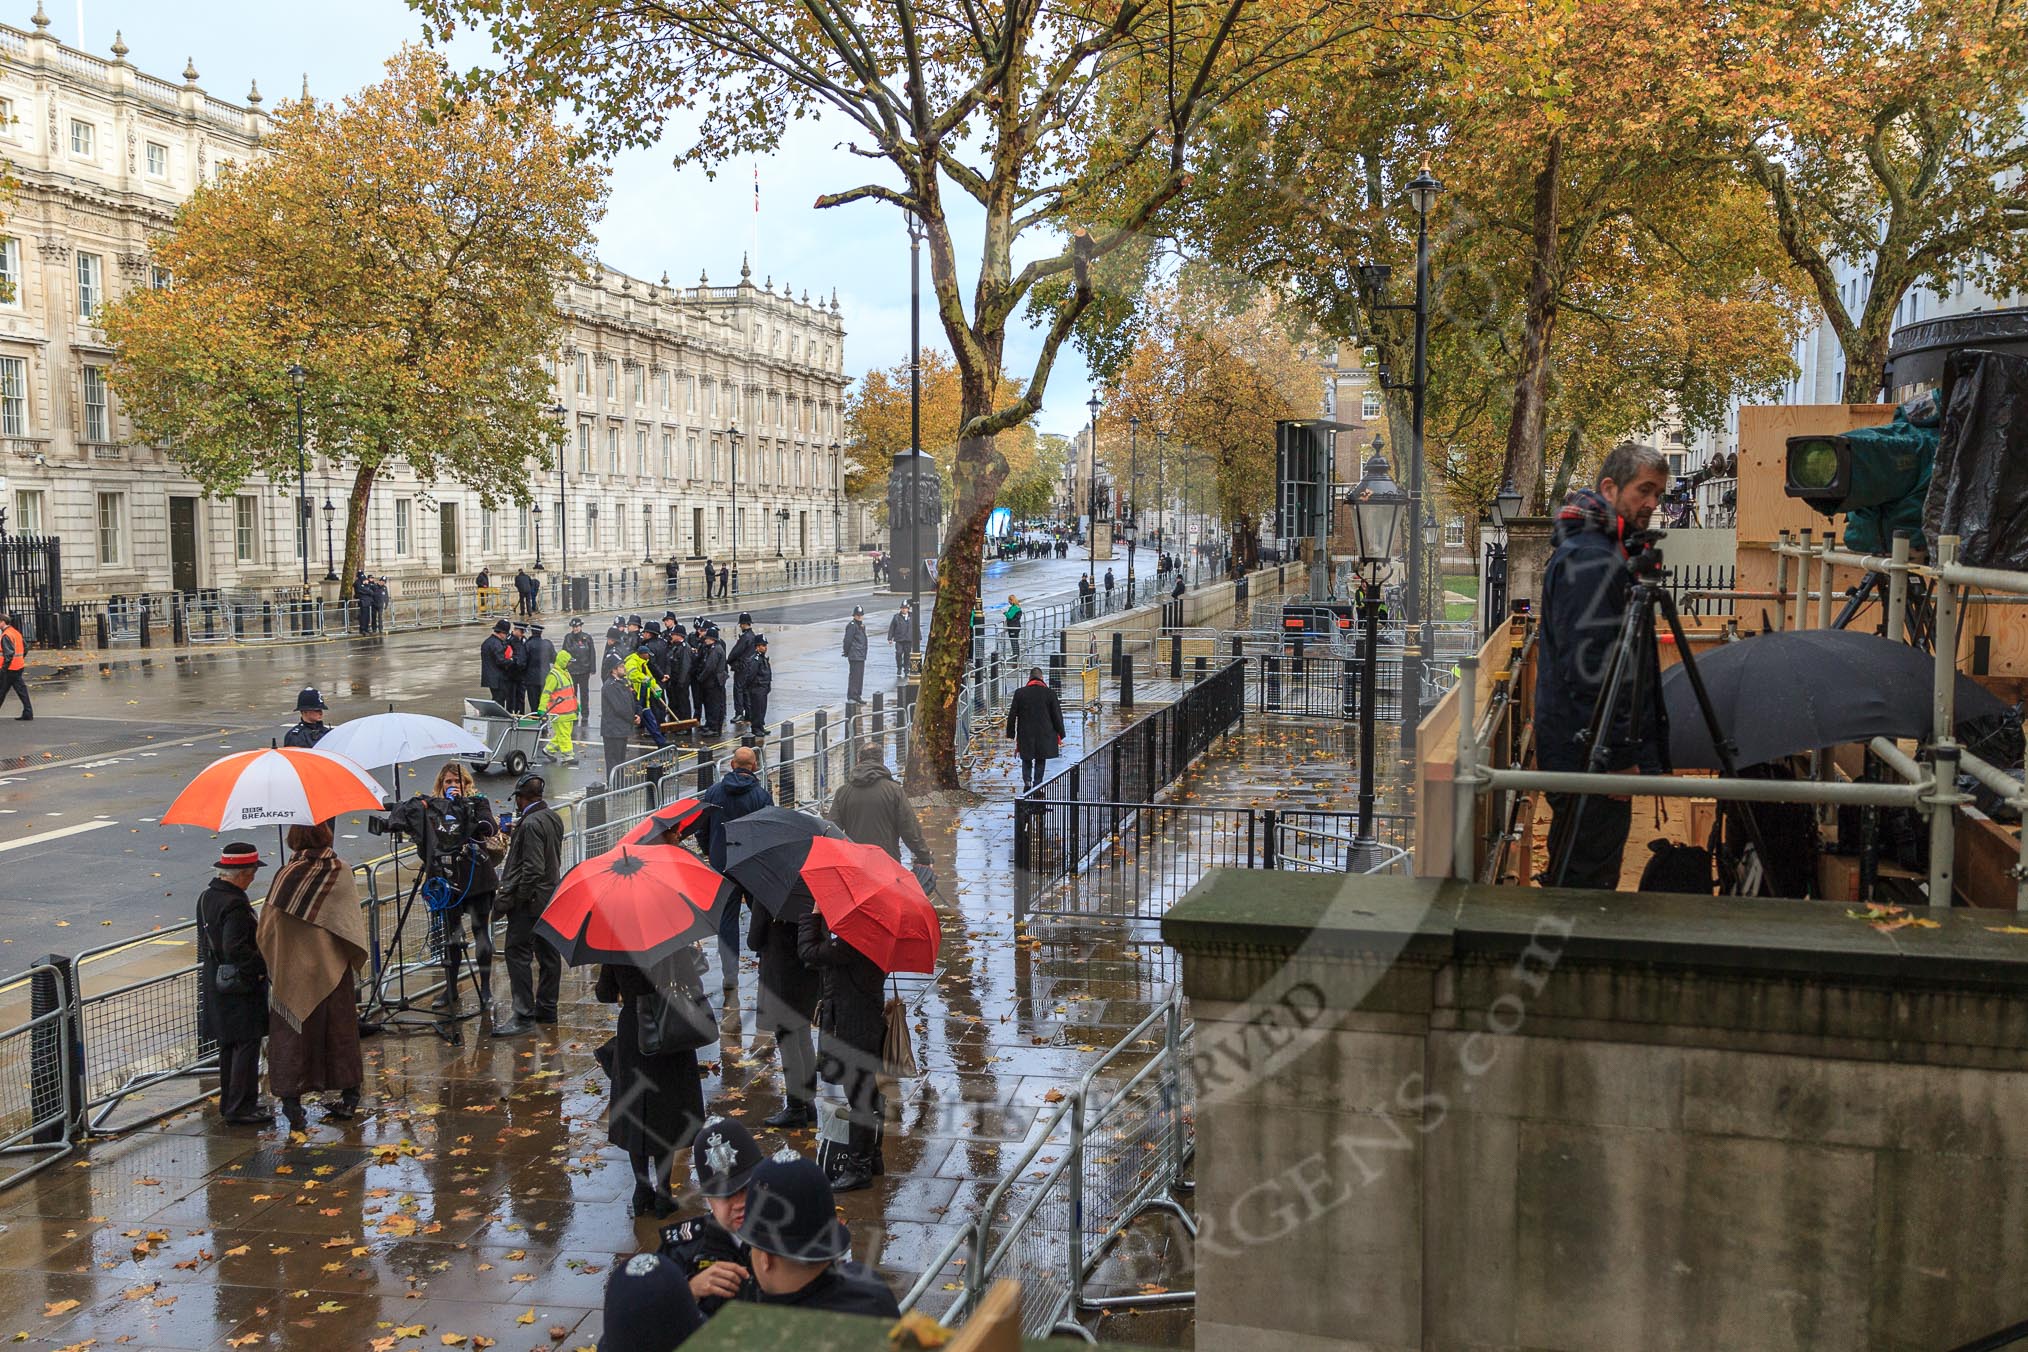 Whitehall on a wet morning before the Remembrance Sunday Cenotaph Ceremony 2018 at Horse Guards Parade, Westminster, London, 11 November 2018, 08:08.